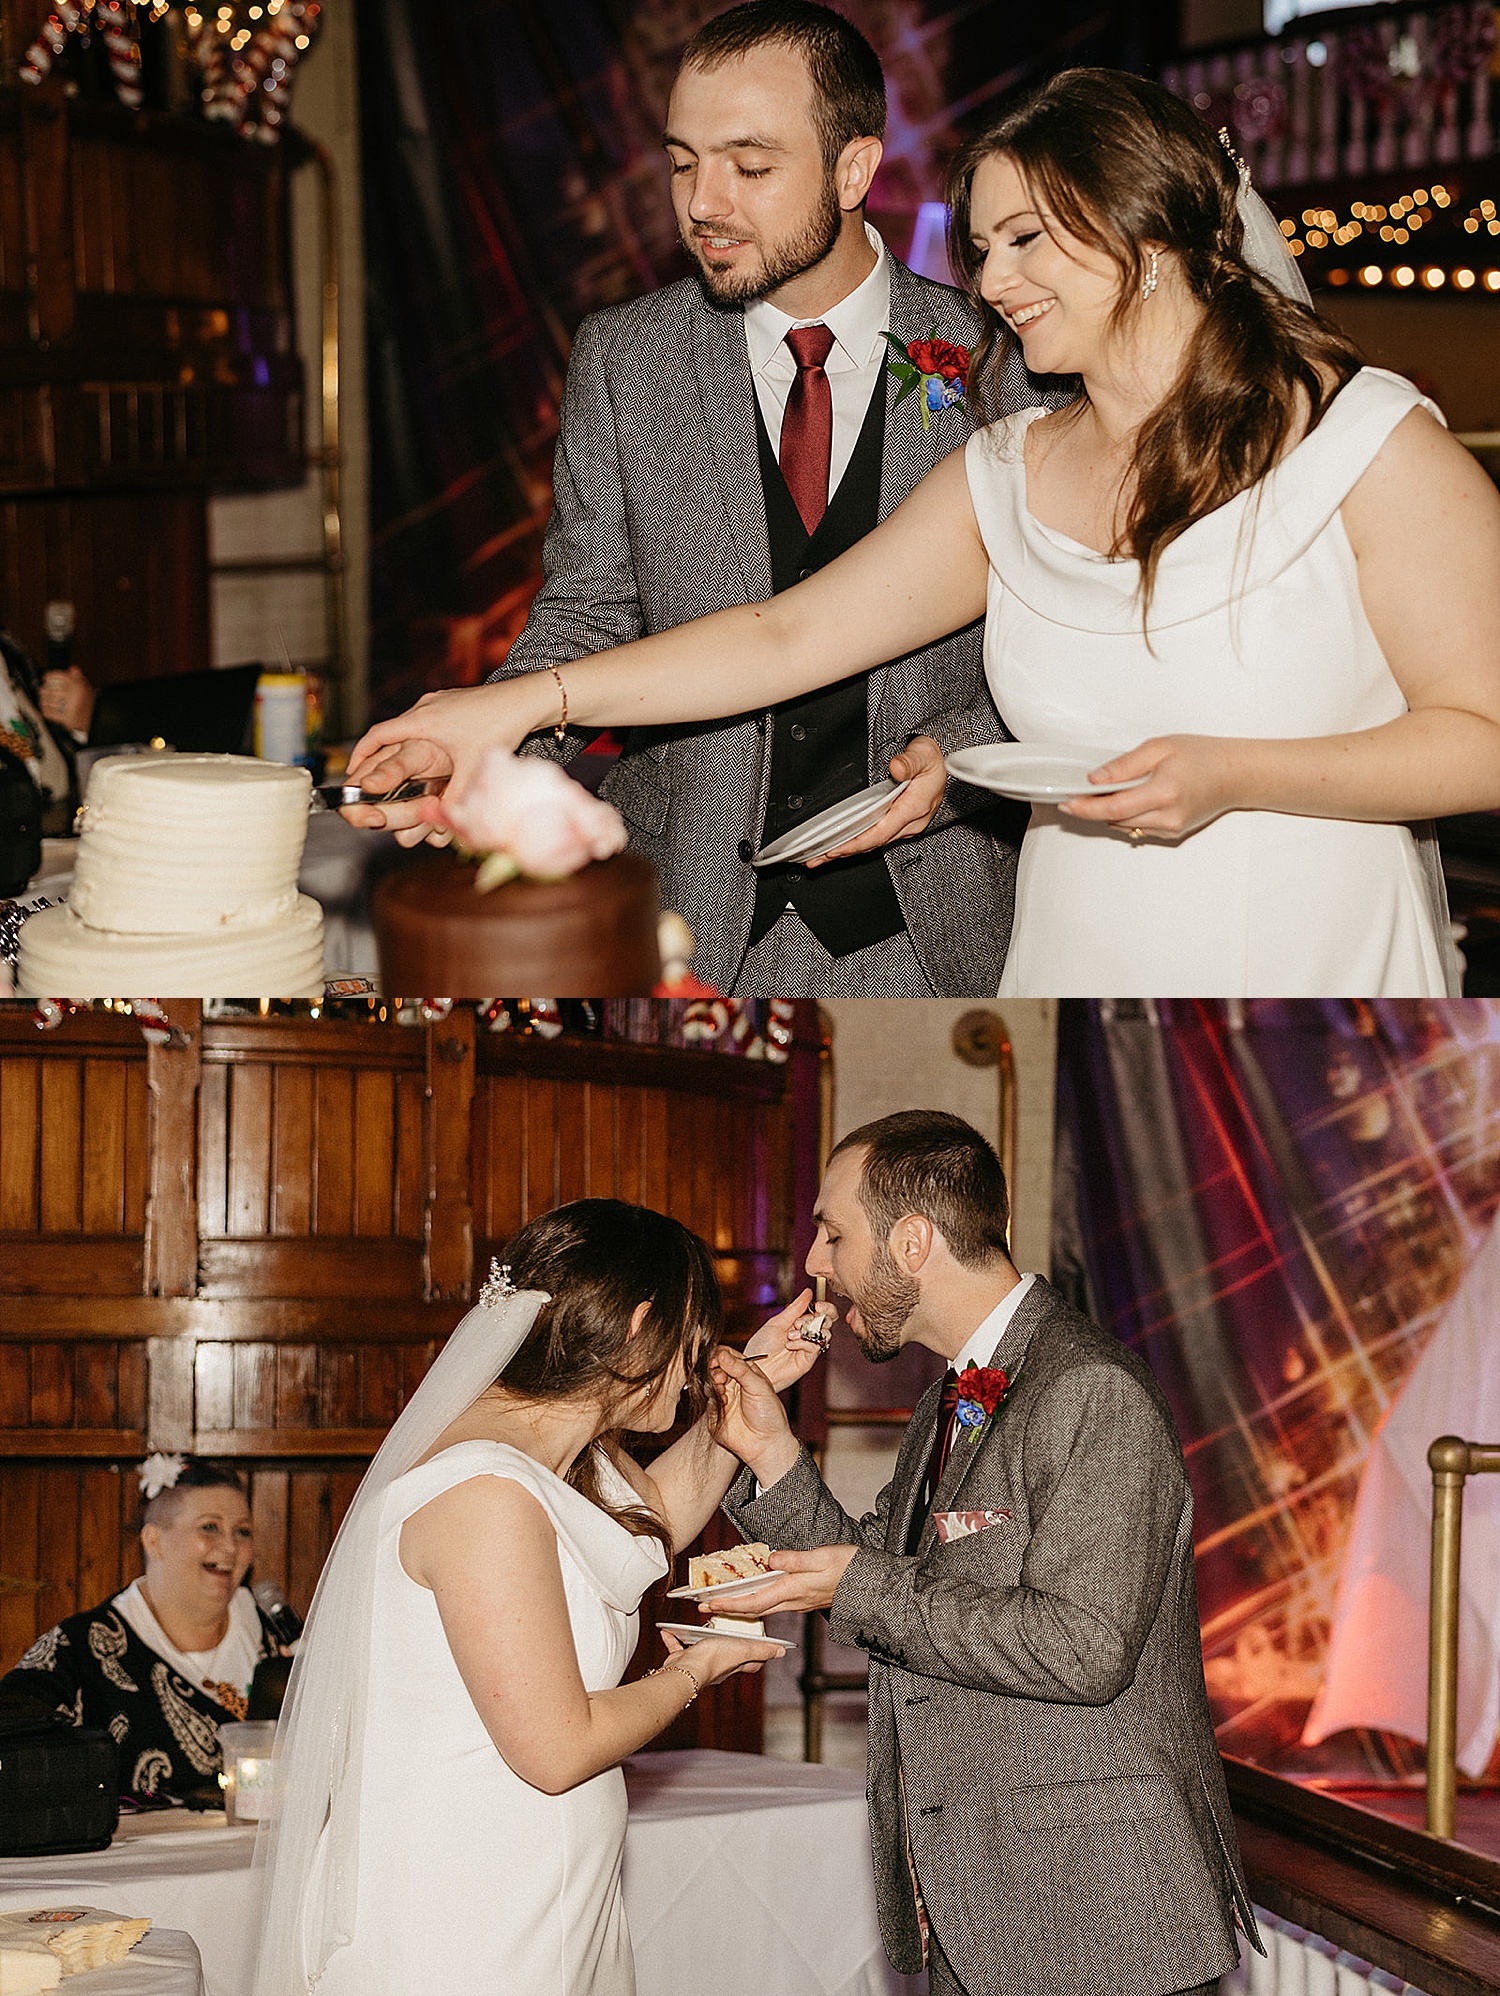 Bride and groom cut wedding cake and feed each other first bites at Seville quarter Wedding